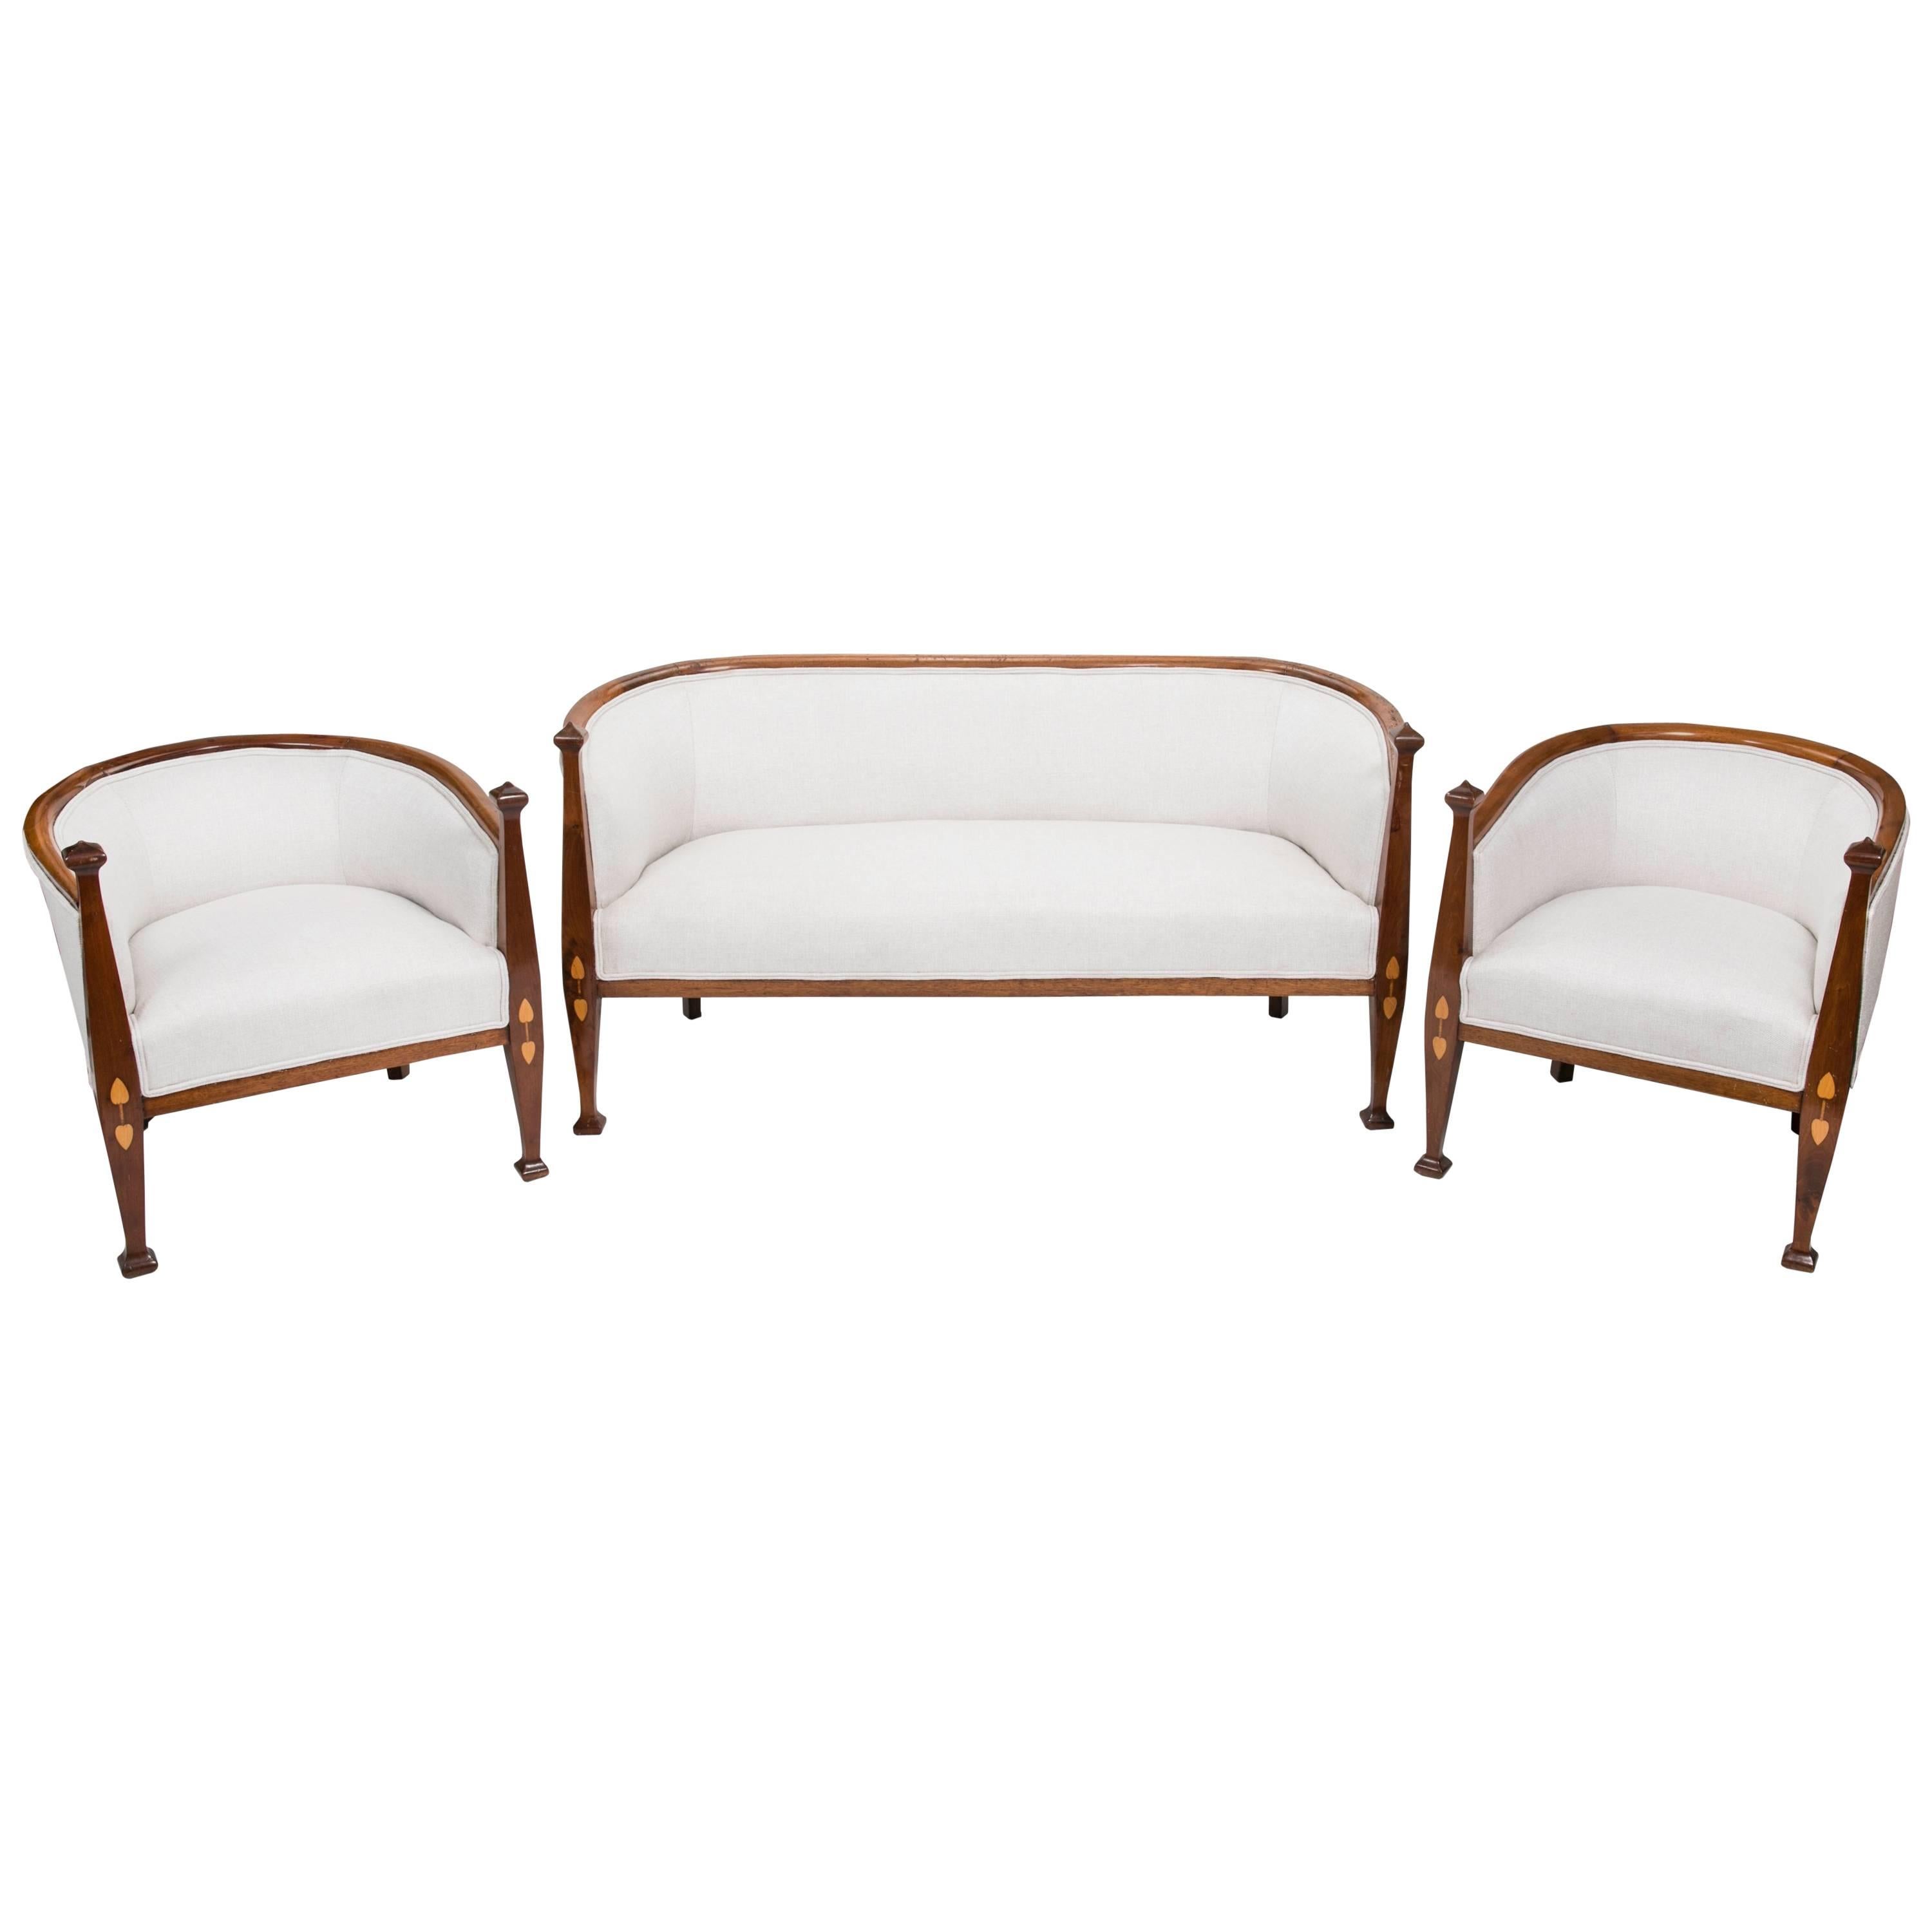 Art Nouveau period three piece set.  Settee and pair of arm chairs.   Beautifully carved walnut wood frame with arms in pod shape posts. The pod design is beautifully  Inlaid on the front  leg posts.  The inlay is done in contrasting light satin